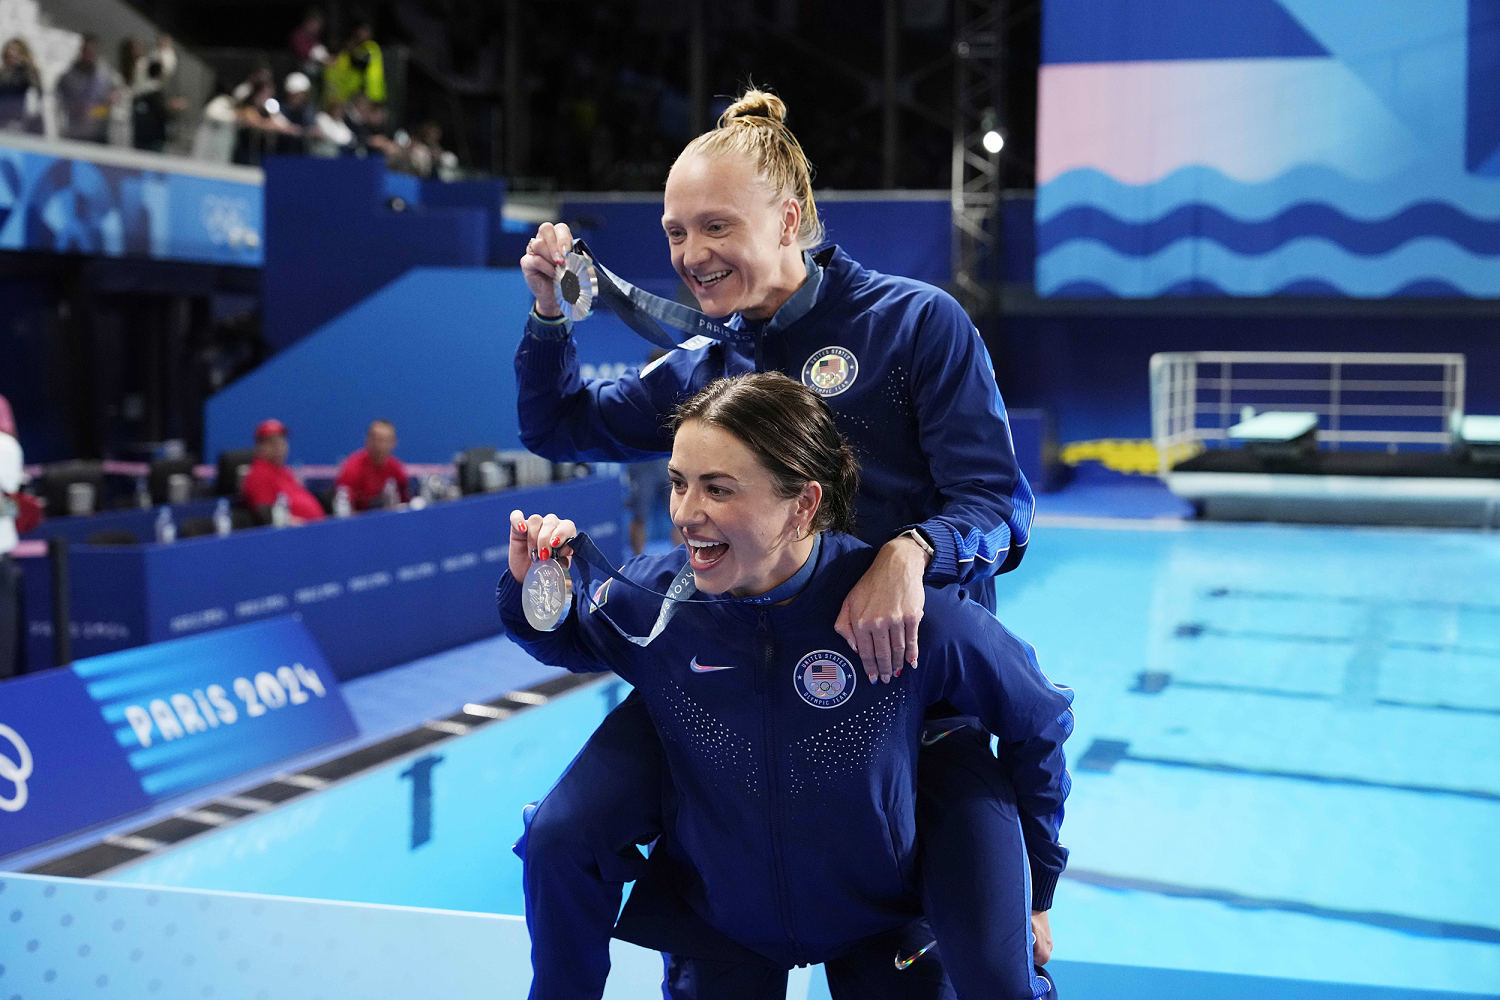 Synchronized divers Sarah Bacon and Kassidy Cook serve up first U.S. medals 